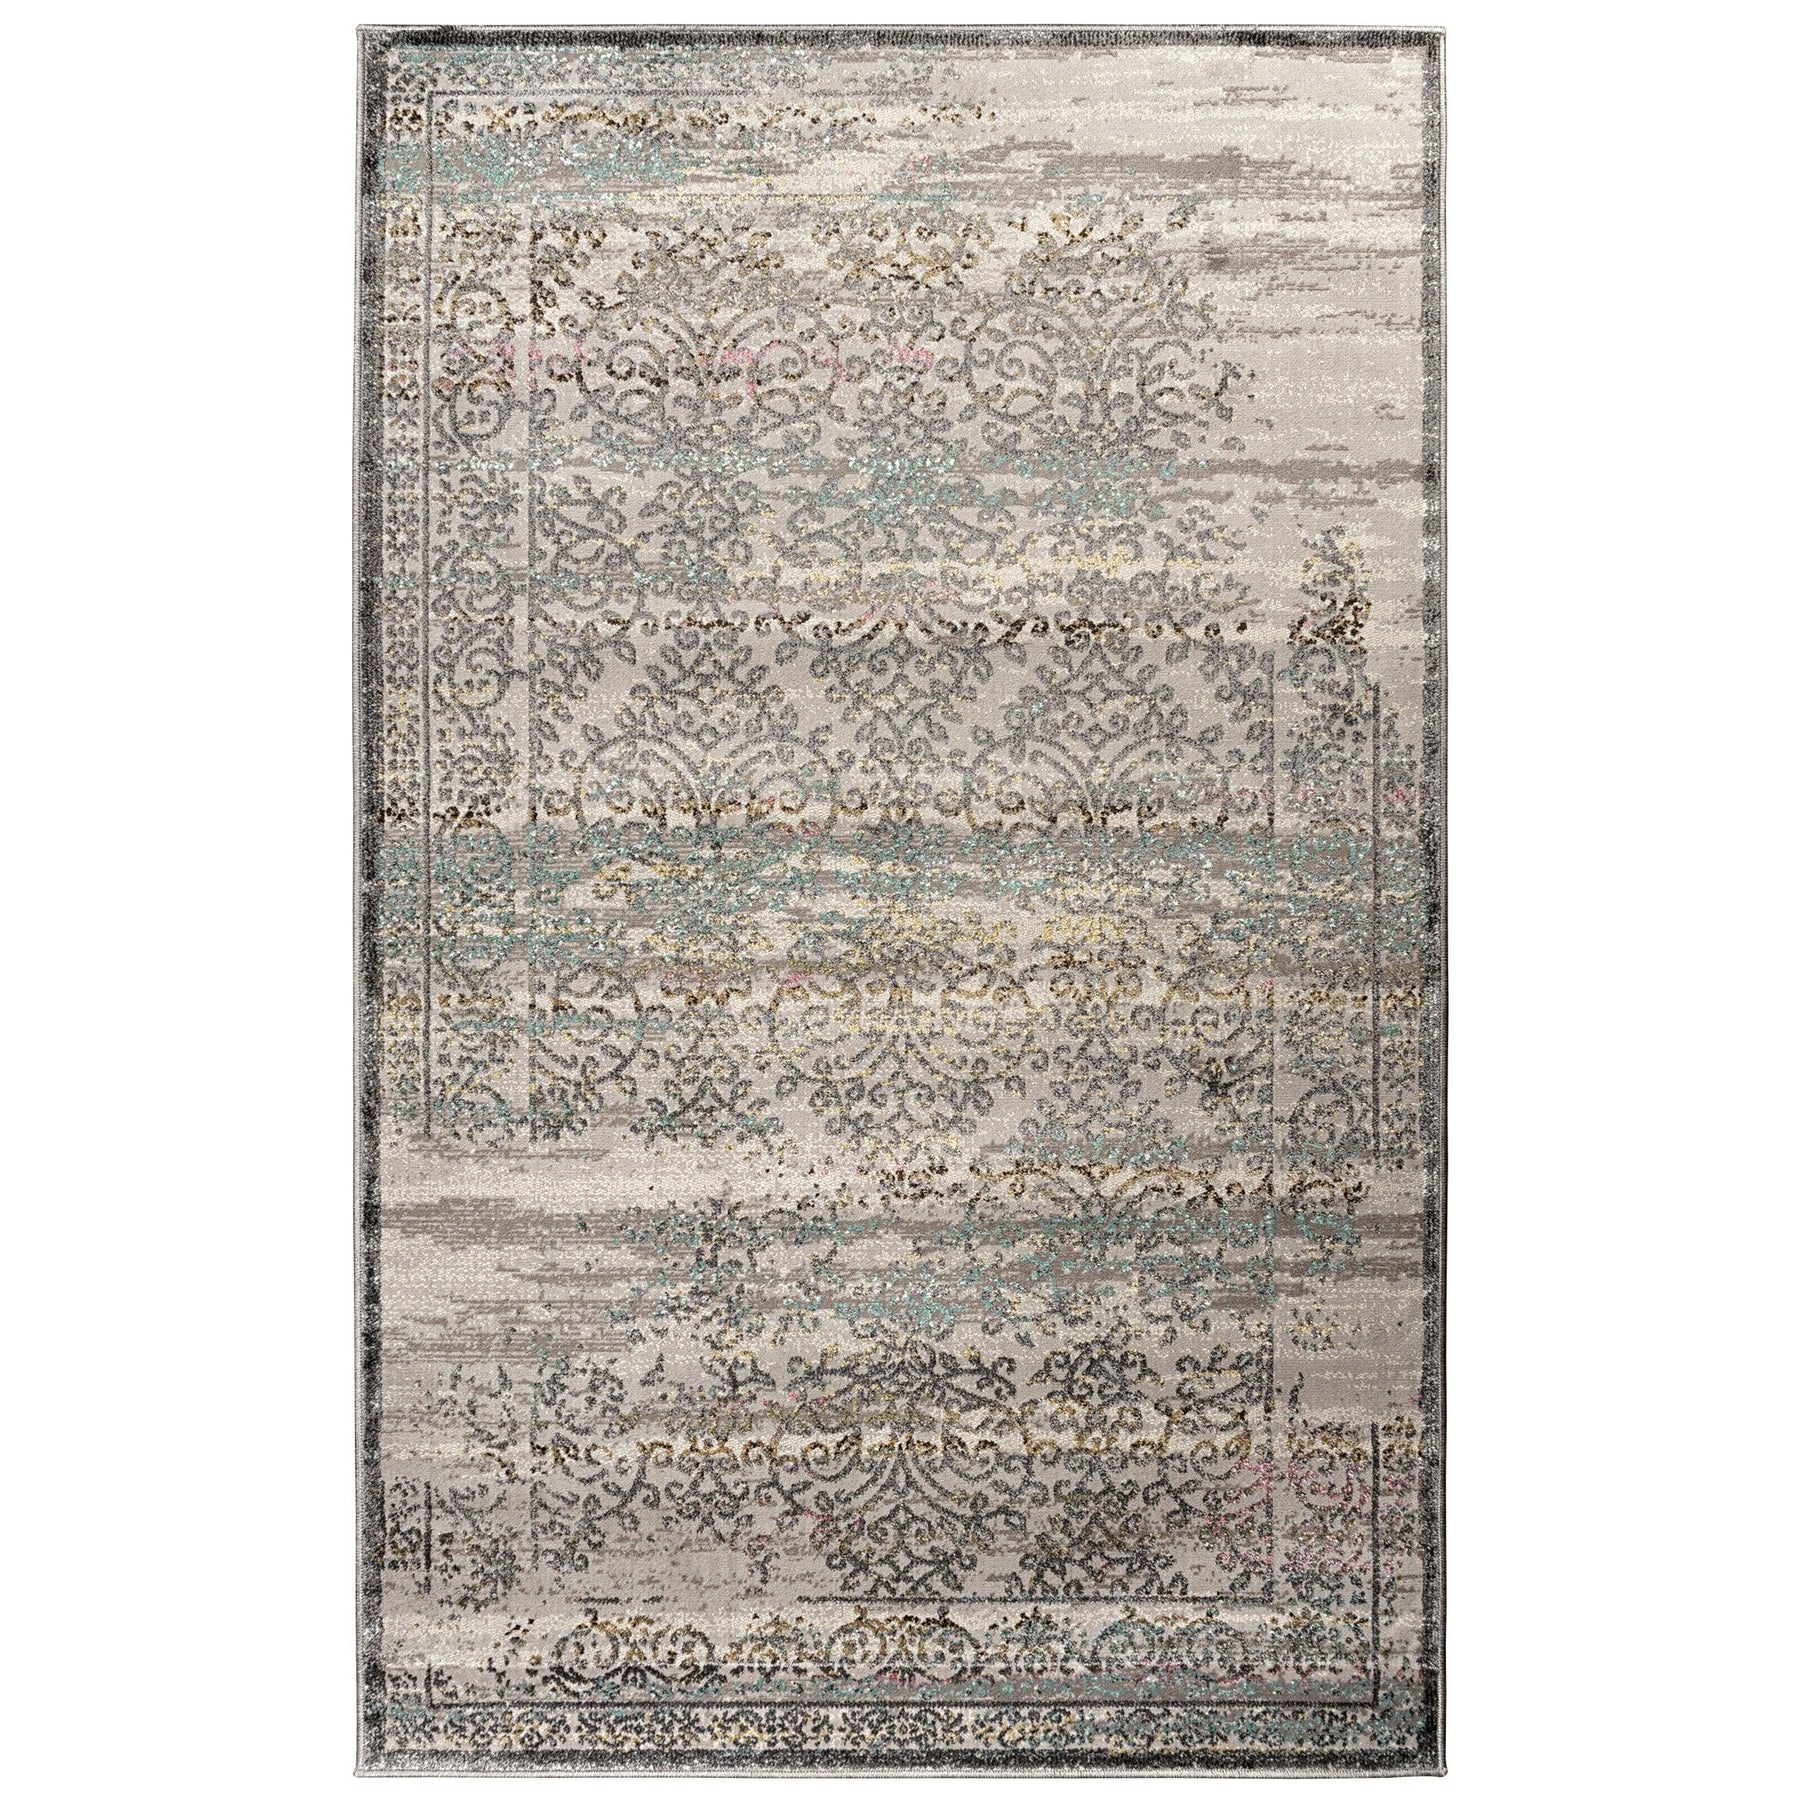 Superior Astrid Floral Filigree Faux Distressed Area or Runner Rug - Grey